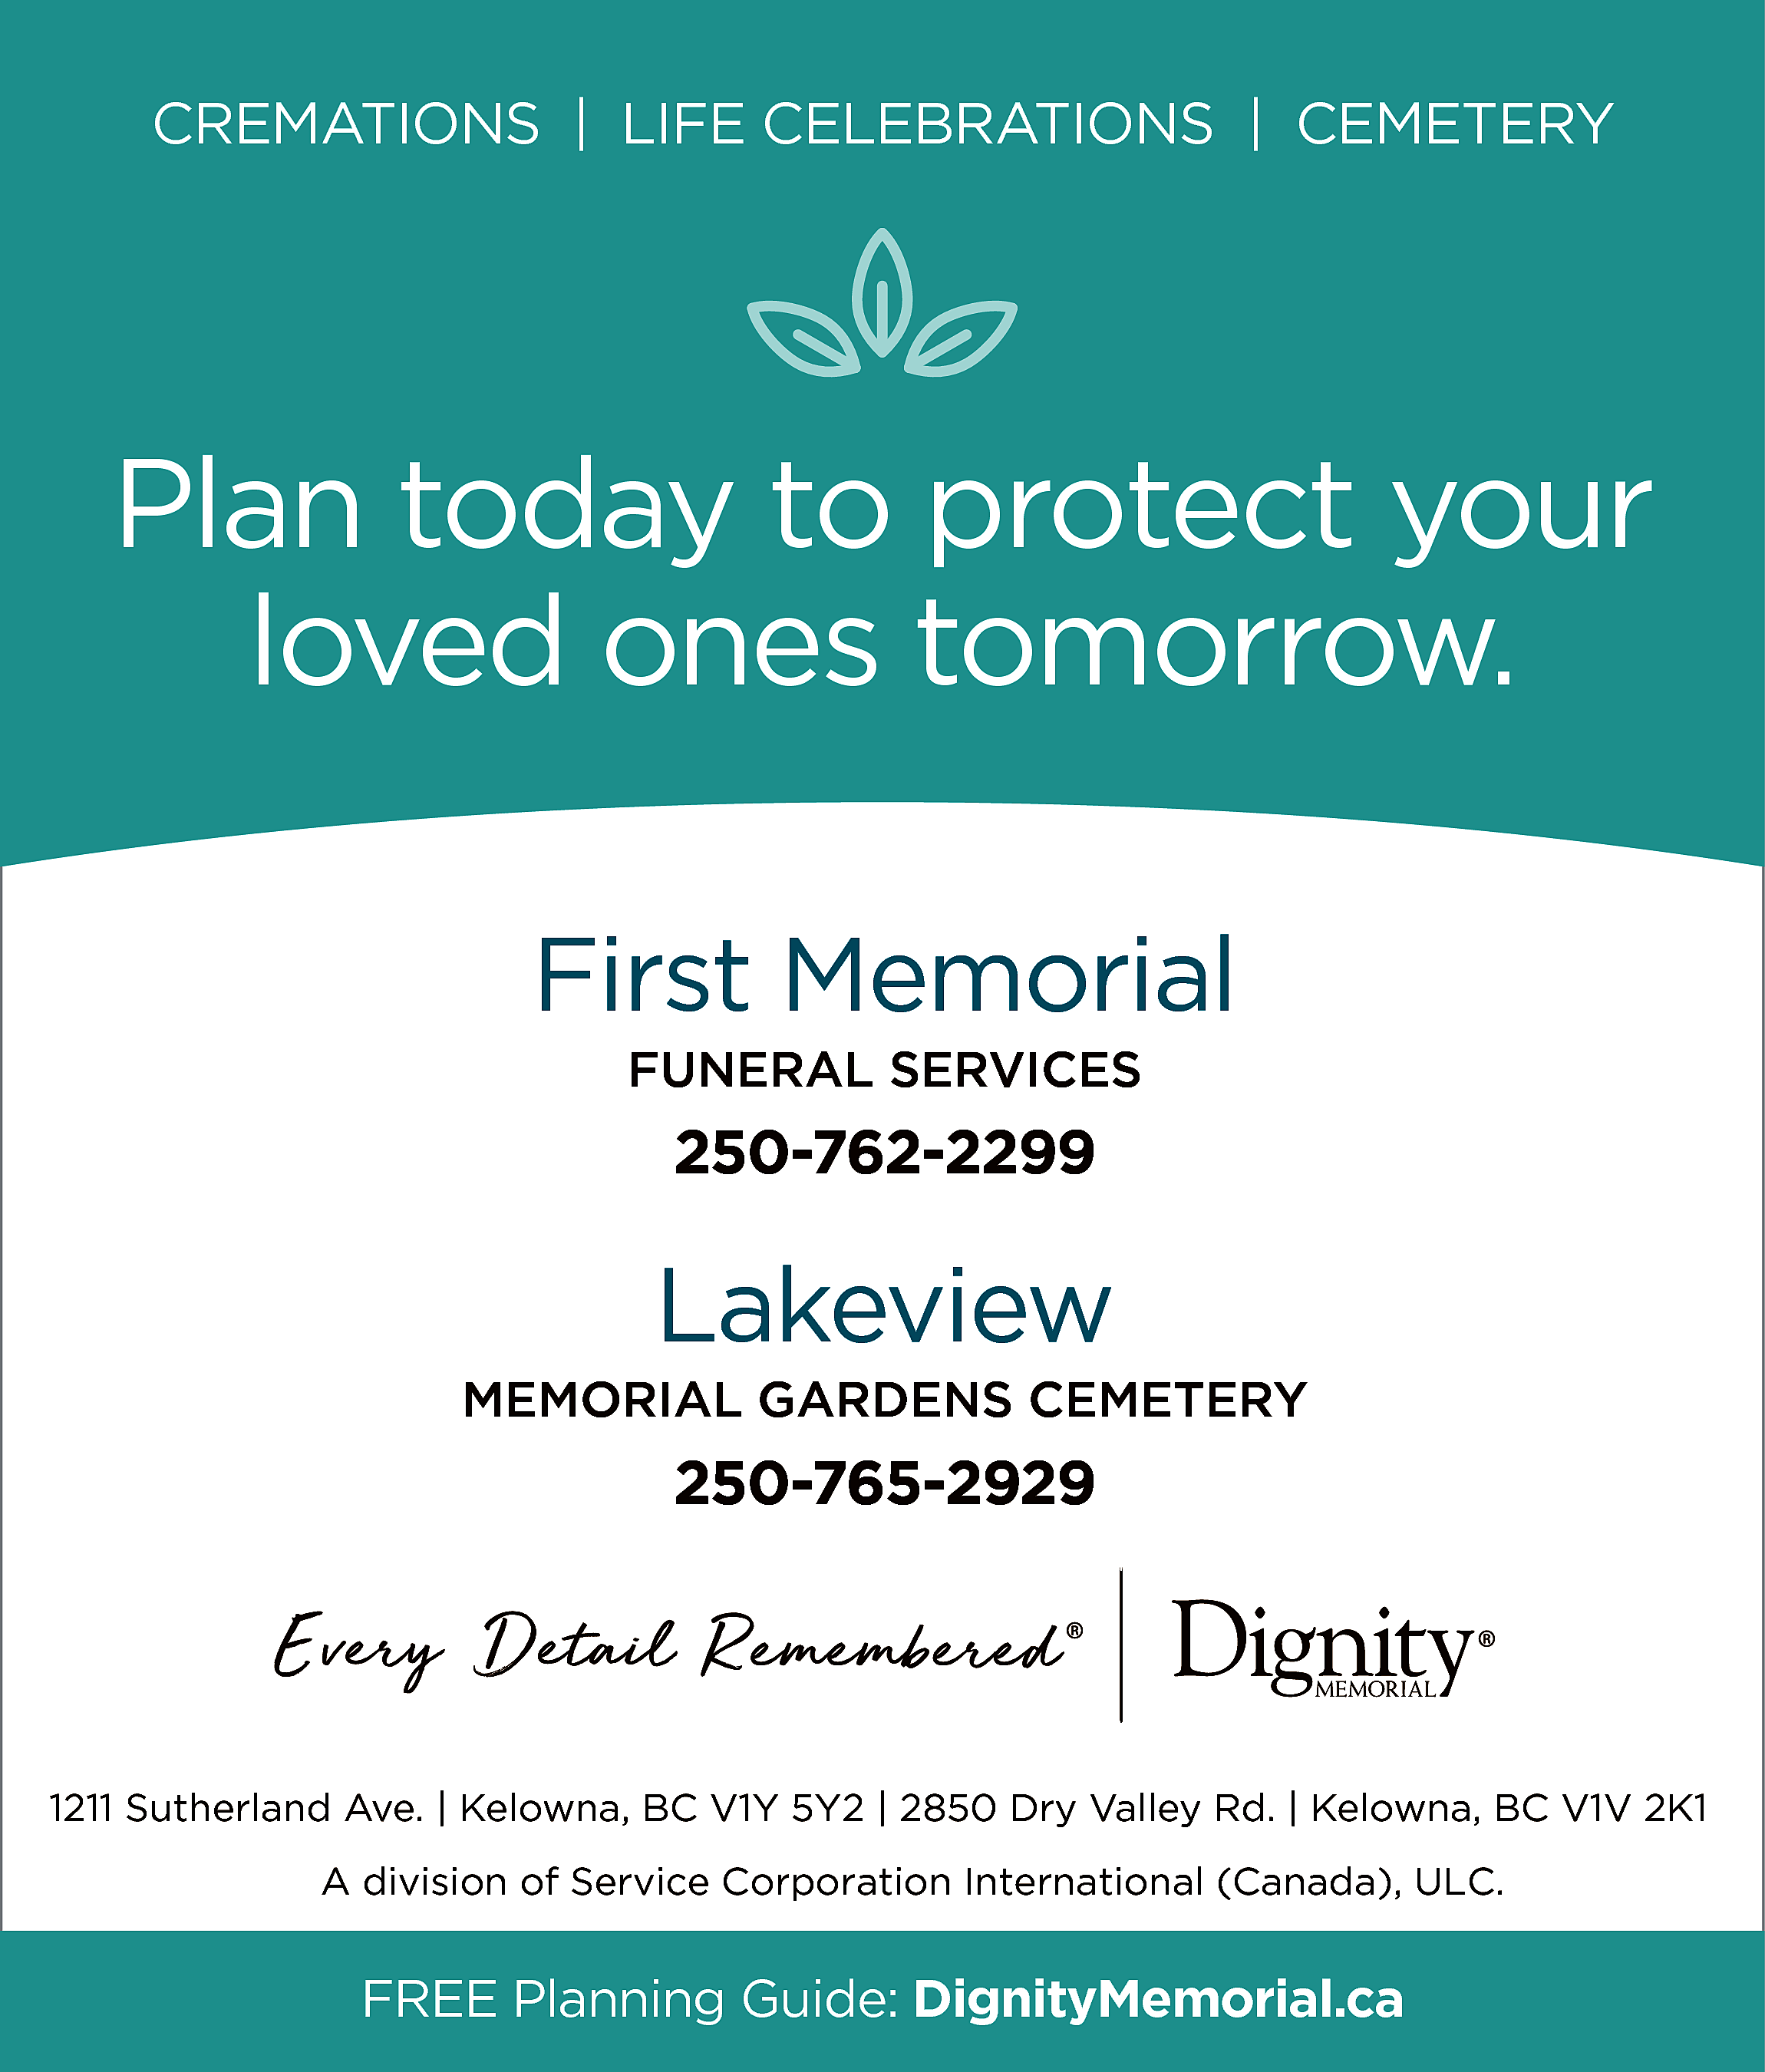 CREMATIONS | LIFE CELEBRATIONS |  CREMATIONS | LIFE CELEBRATIONS | CEMETERY    Plan today to protect your  loved ones tomorrow.  First Memorial  FUNERAL SERVICES    250-762-2299    Lakeview  MEMORIAL GARDENS CEMETERY    250-765-2929    1211 Sutherland Ave. | Kelowna, BC V1Y 5Y2 | 2850 Dry Valley Rd. | Kelowna, BC V1V 2K1  A division of Service Corporation International (Canada), ULC.    FREE Planning Guide: DignityMemorial.ca    